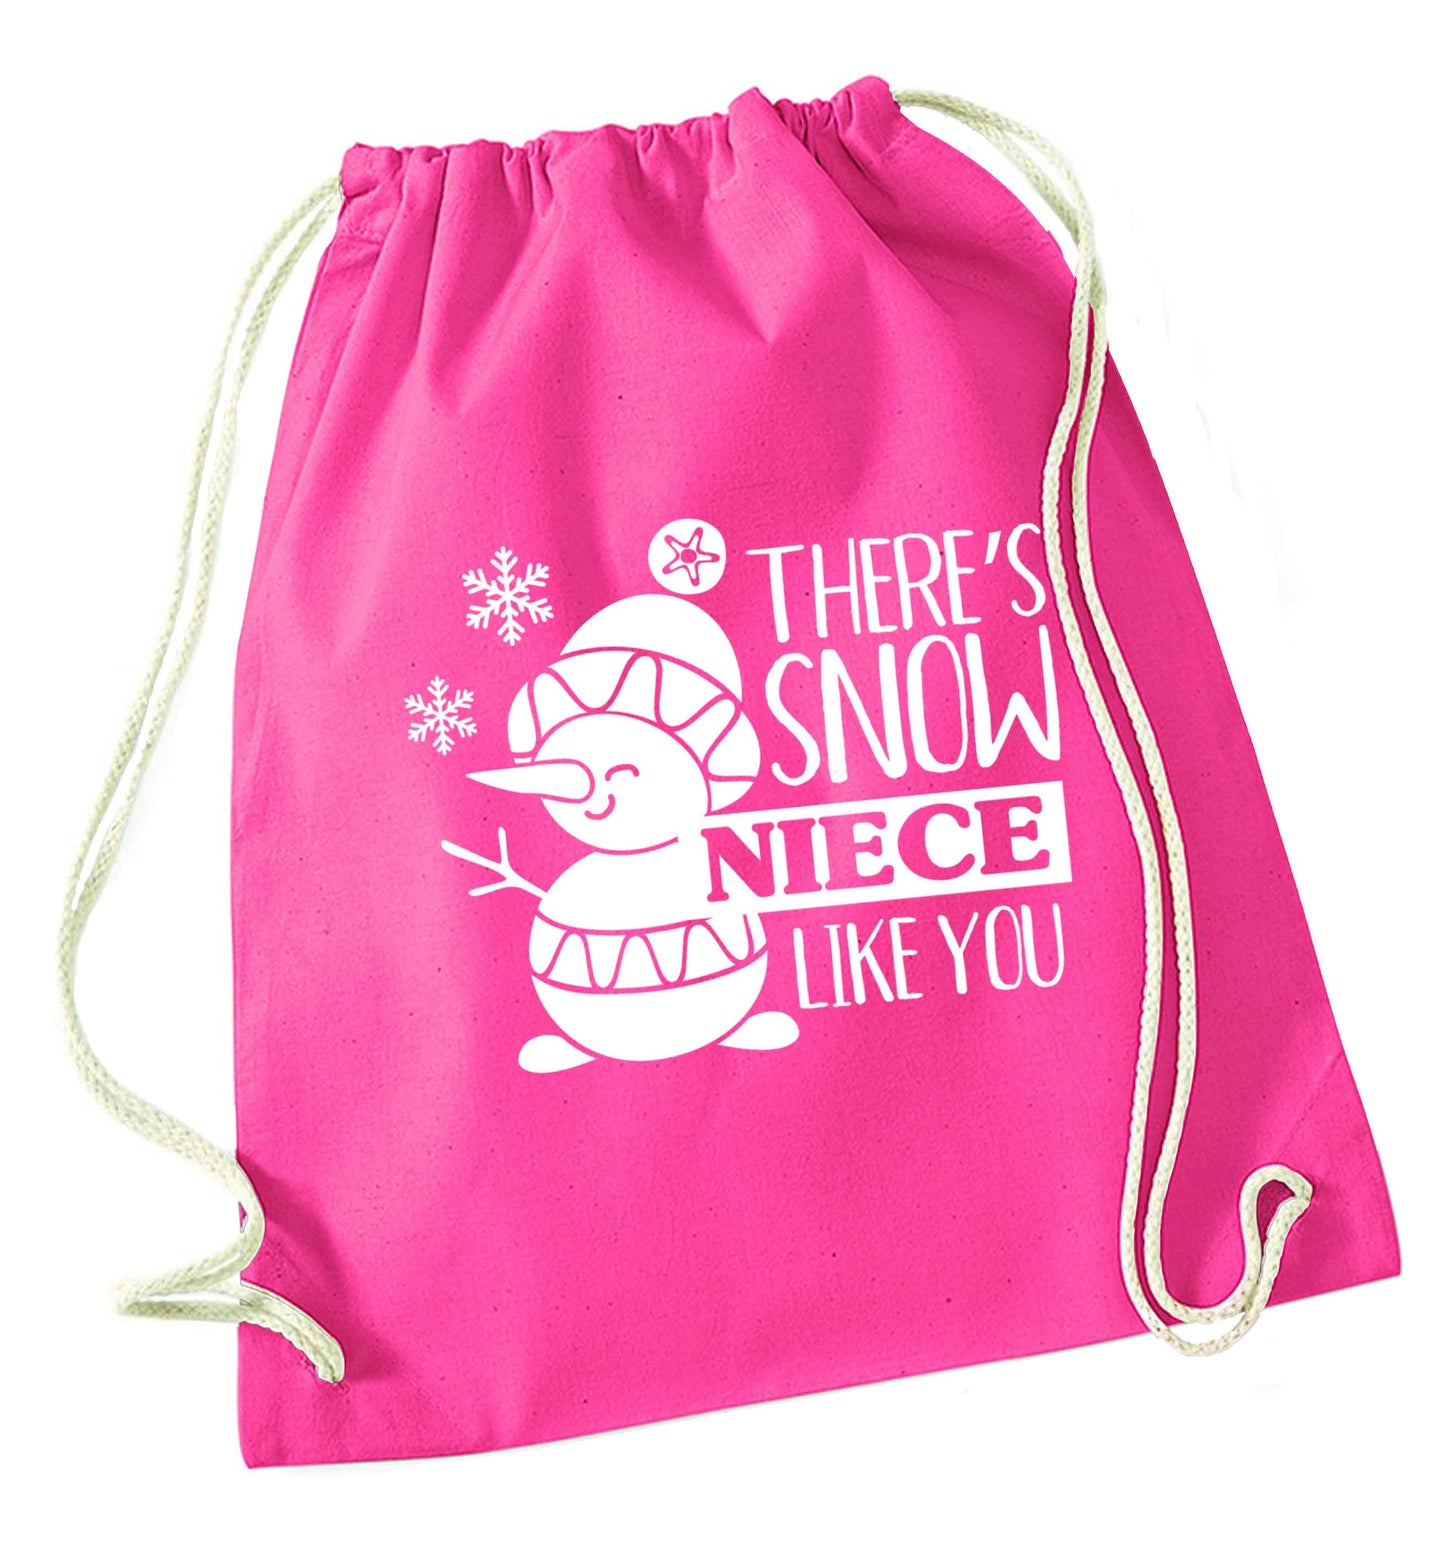 There's snow niece like you pink drawstring bag